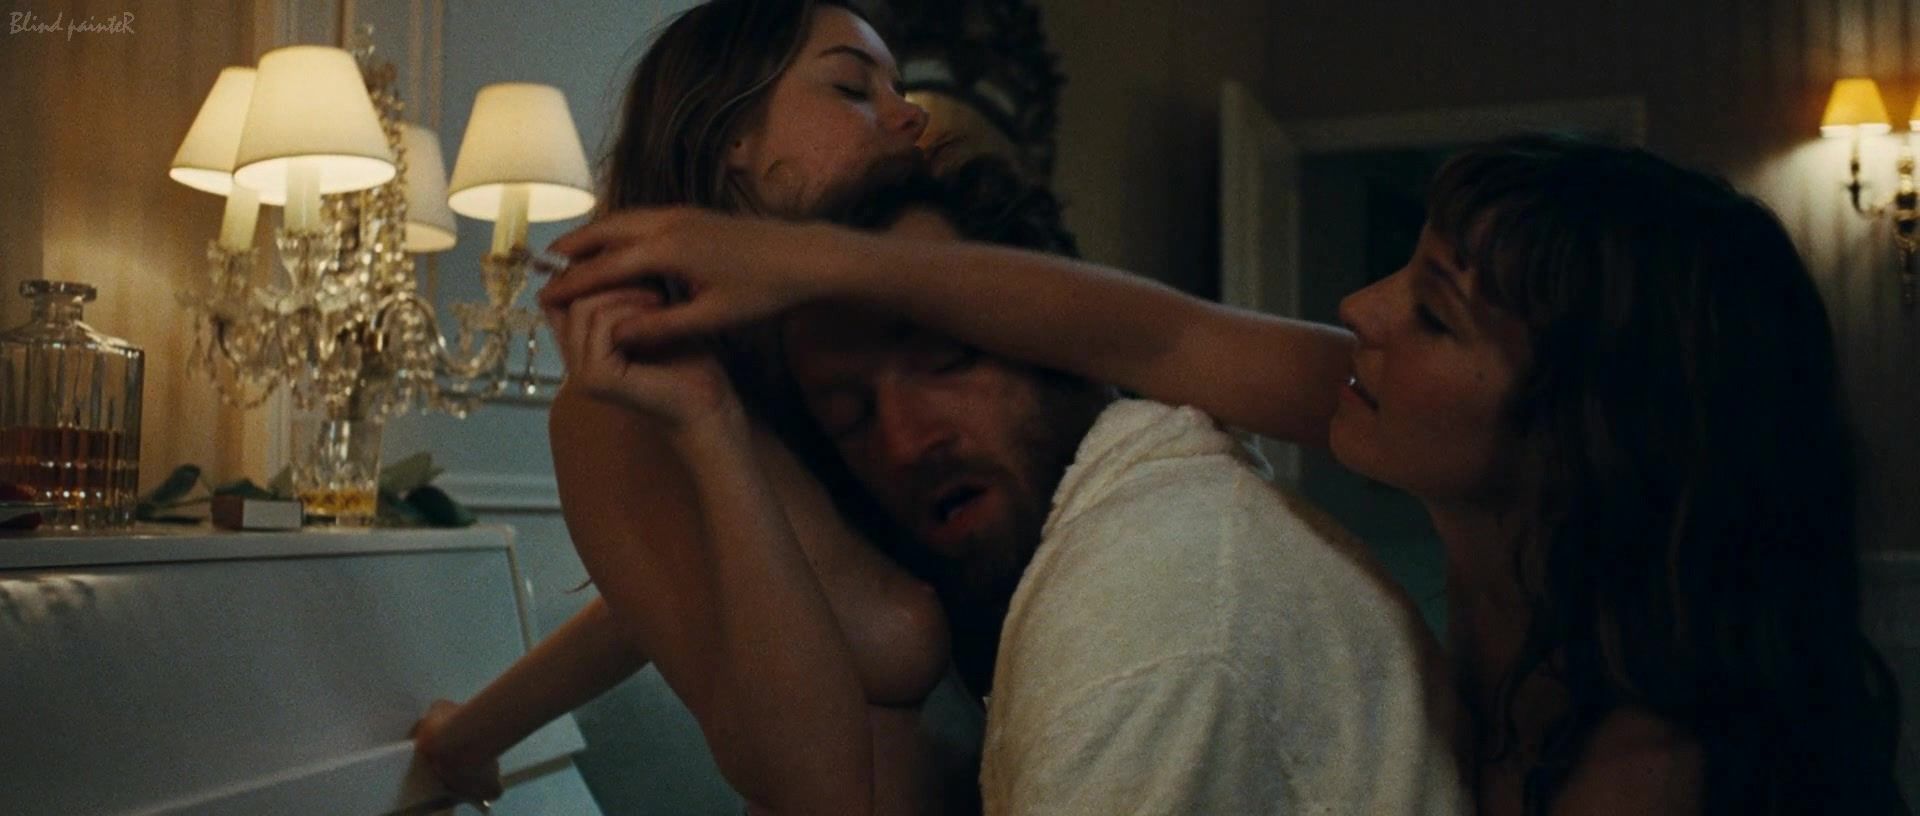 Old Vs Young Sex video Camille Rowe - Our Day Will Come (Notre Jour Viendra) (2010) Youporn